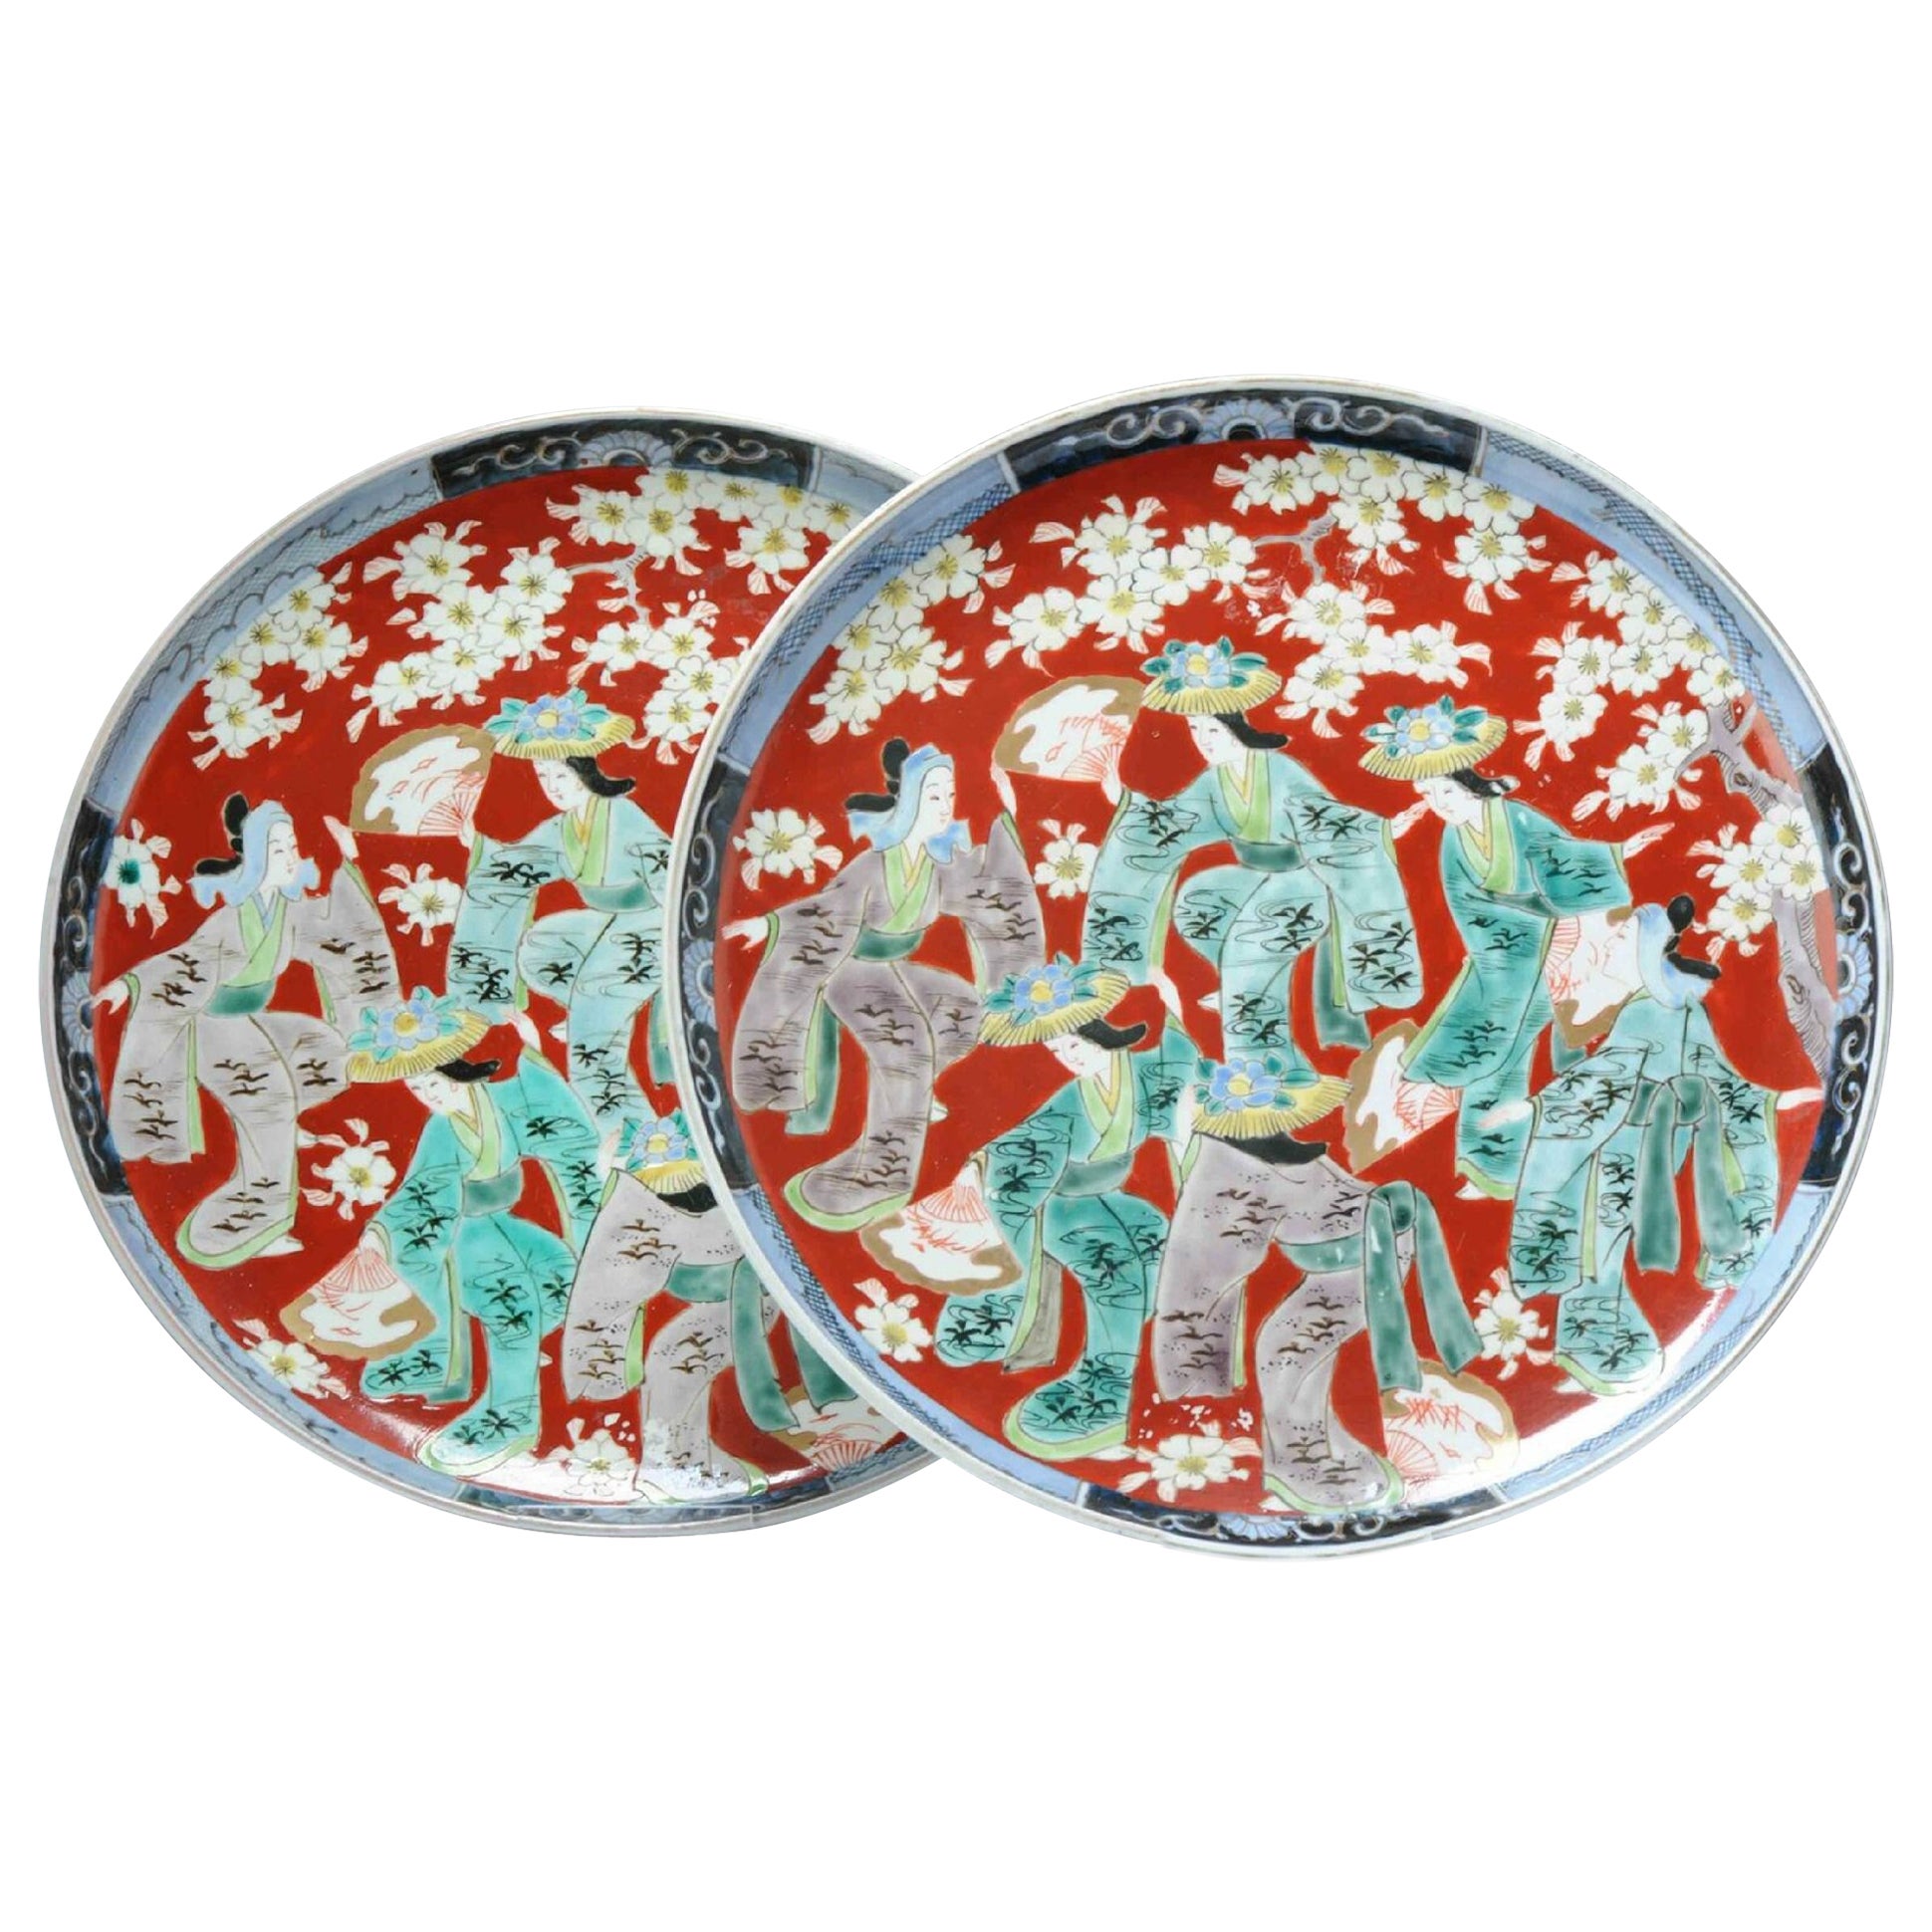 Pair of Antique Japanese Arita Chargers with Ladies in a Garden, 19th Century